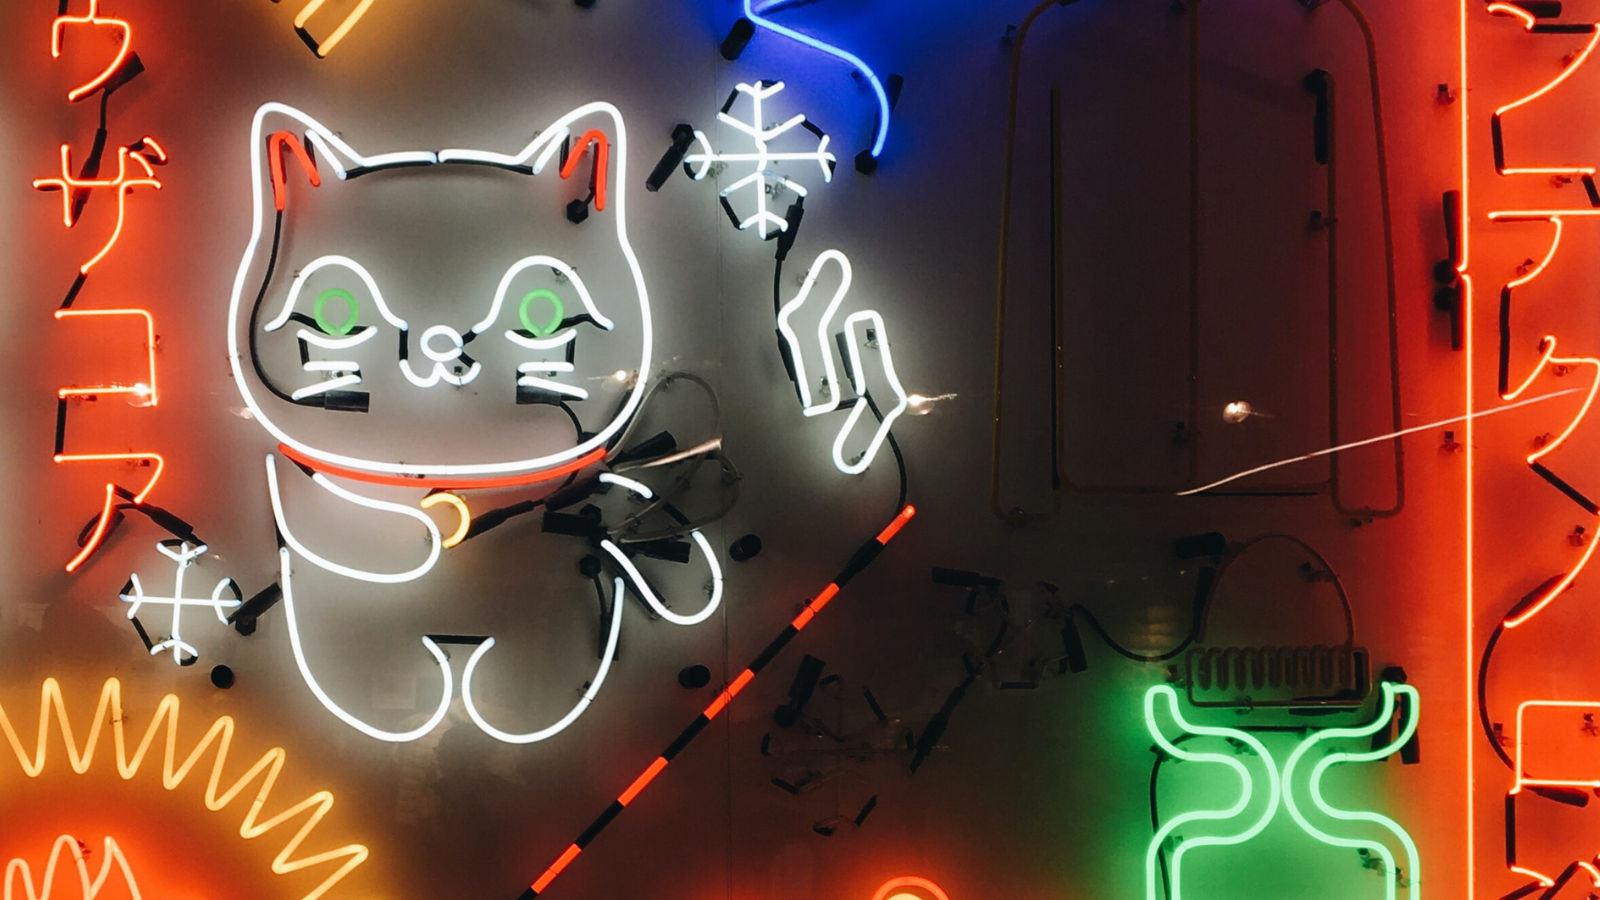 Japanese Neon Signs